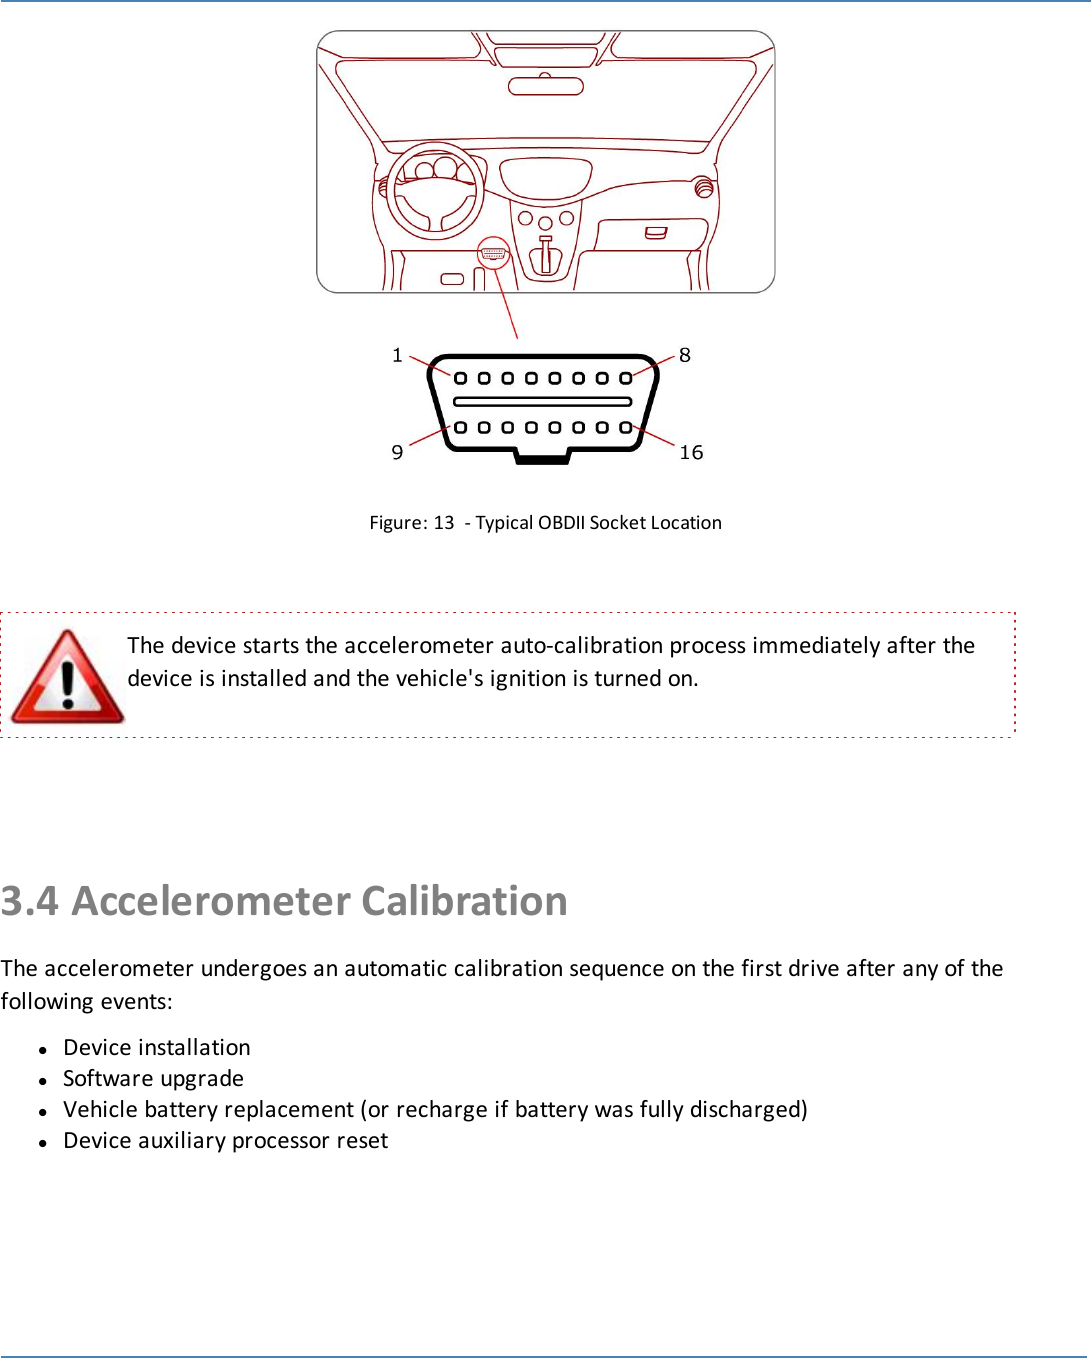 19Figure: 13 - Typical OBDII Socket LocationThe device starts the accelerometer auto-calibration process immediately after thedevice is installed and the vehicle&apos;s ignition is turned on.3.4 Accelerometer CalibrationThe accelerometer undergoes an automatic calibration sequence on the first drive after any of thefollowing events:lDevice installationlSoftware upgradelVehicle battery replacement (or recharge if battery was fully discharged)lDevice auxiliary processor reset